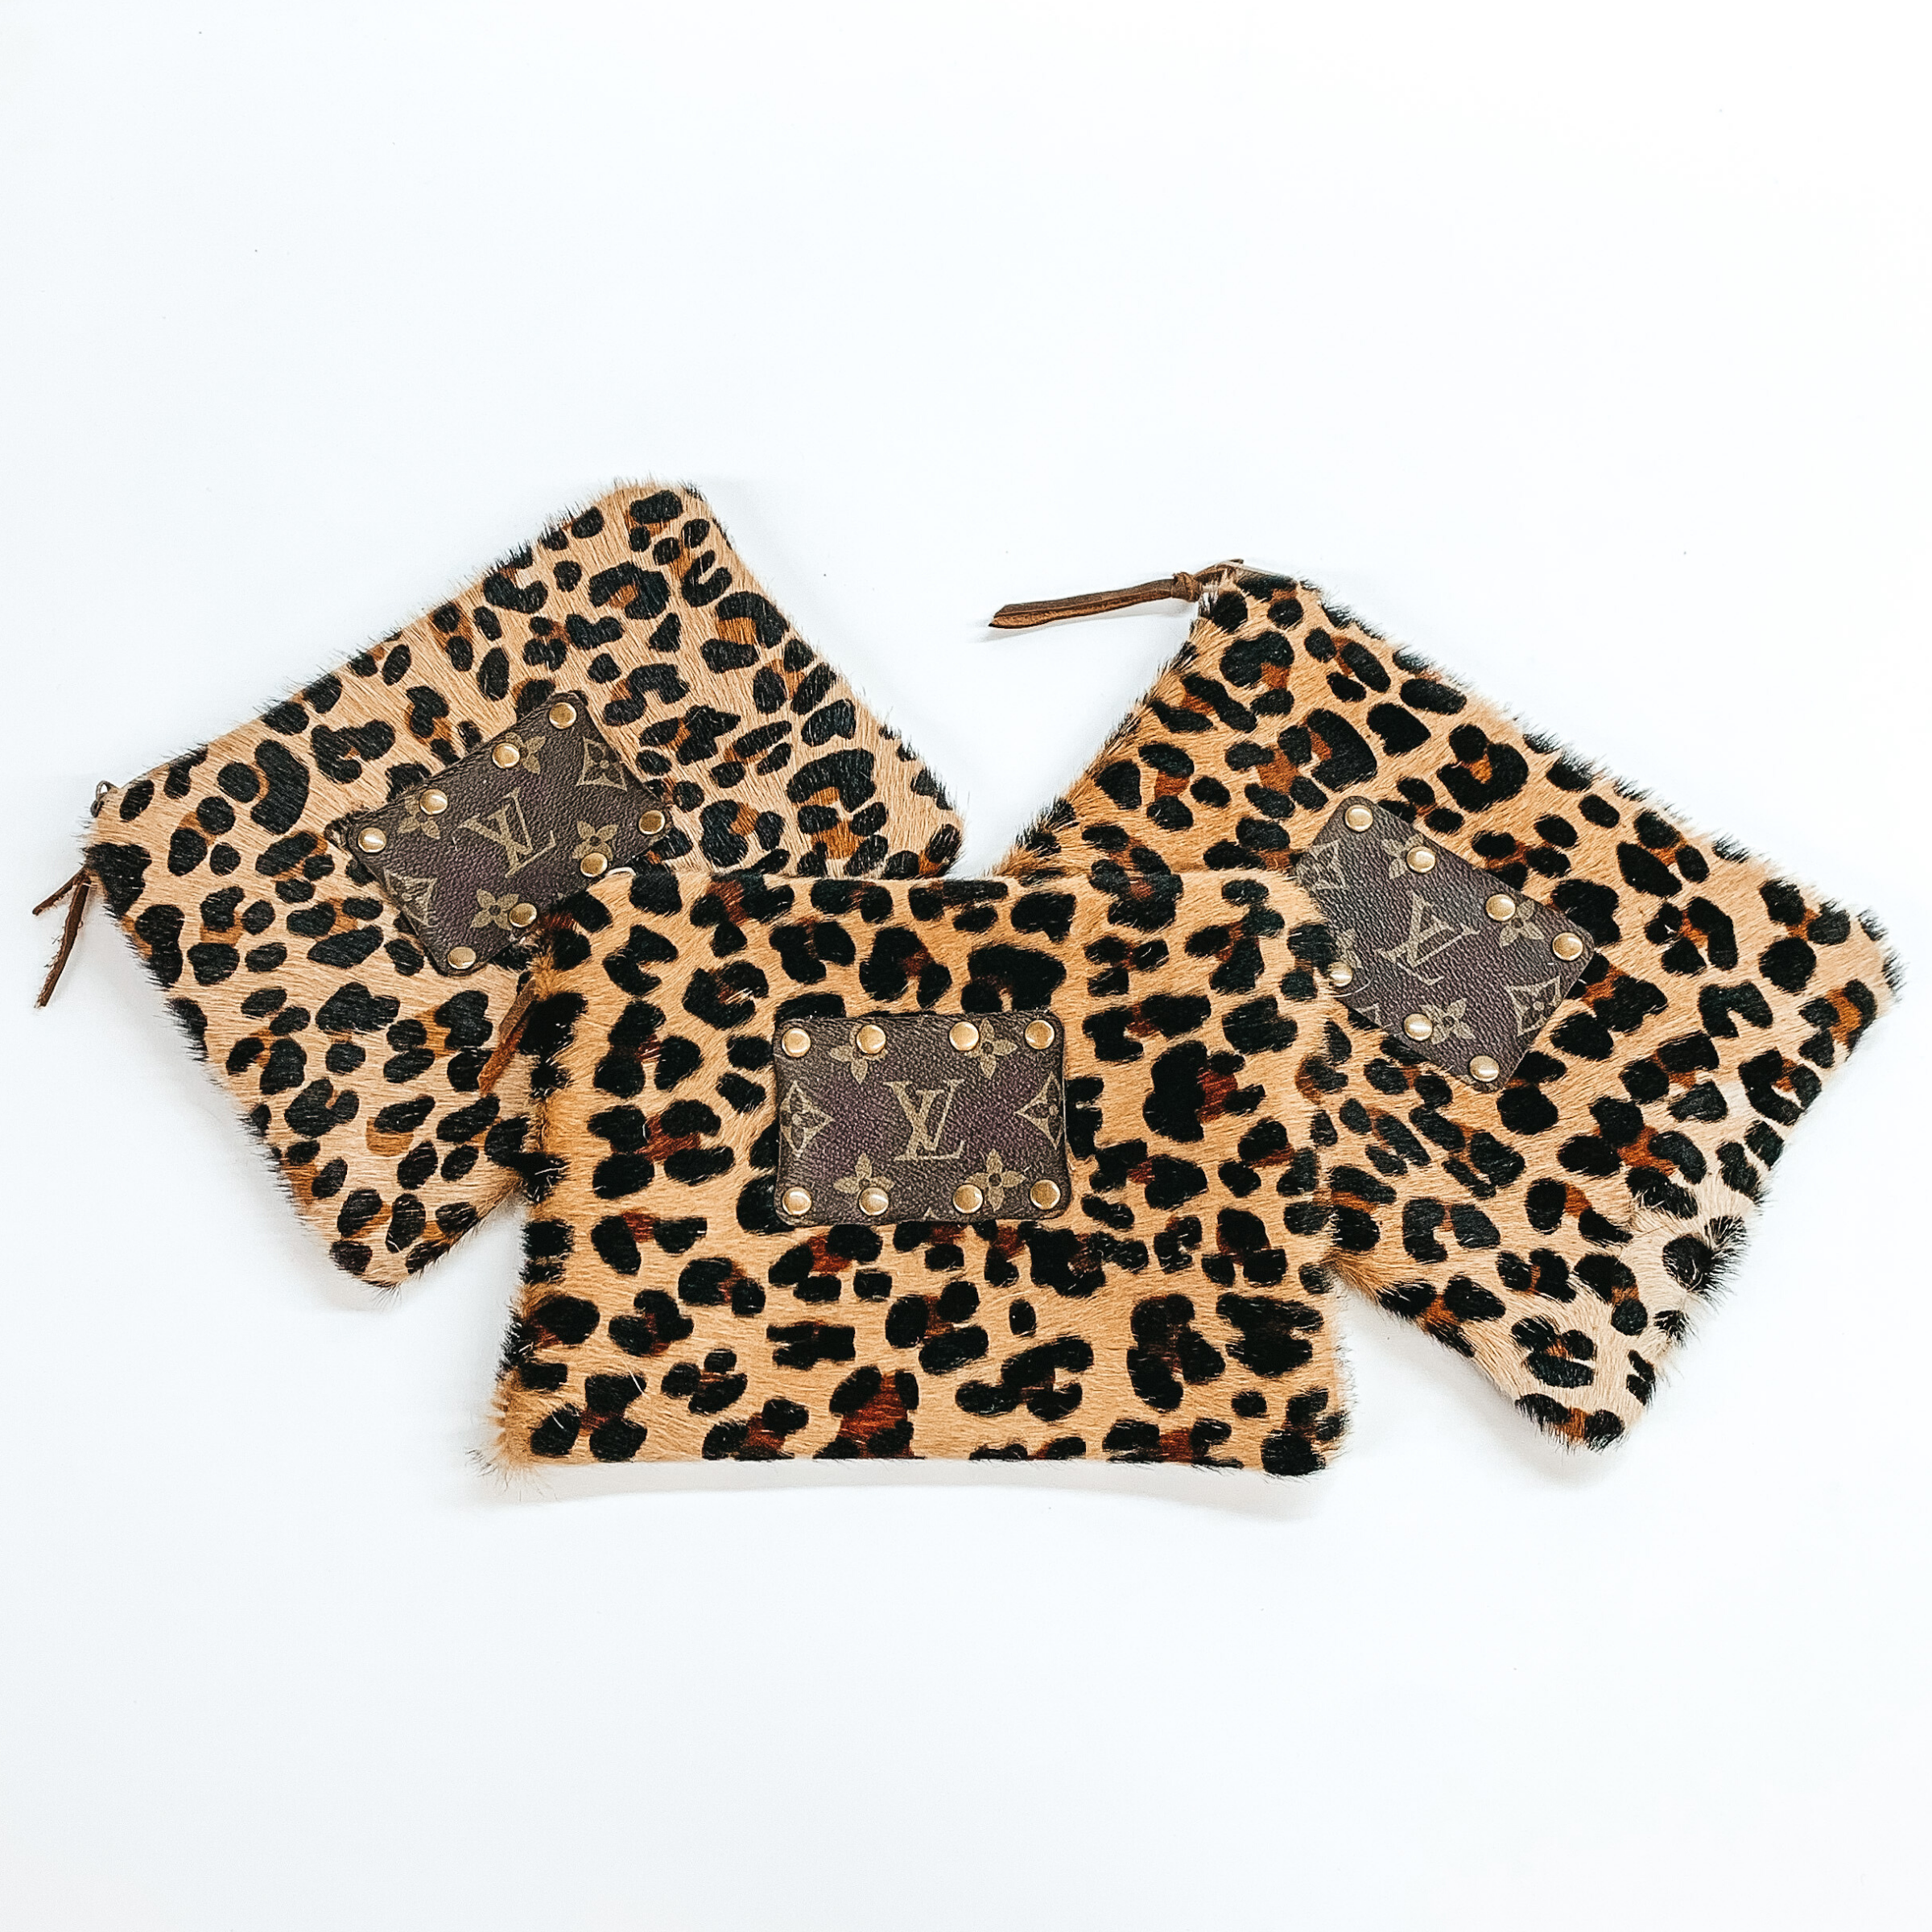 Keep It Gypsy | Leopard Print Cowhide Make Up Bag with a Leather Embellishment - Giddy Up Glamour Boutique